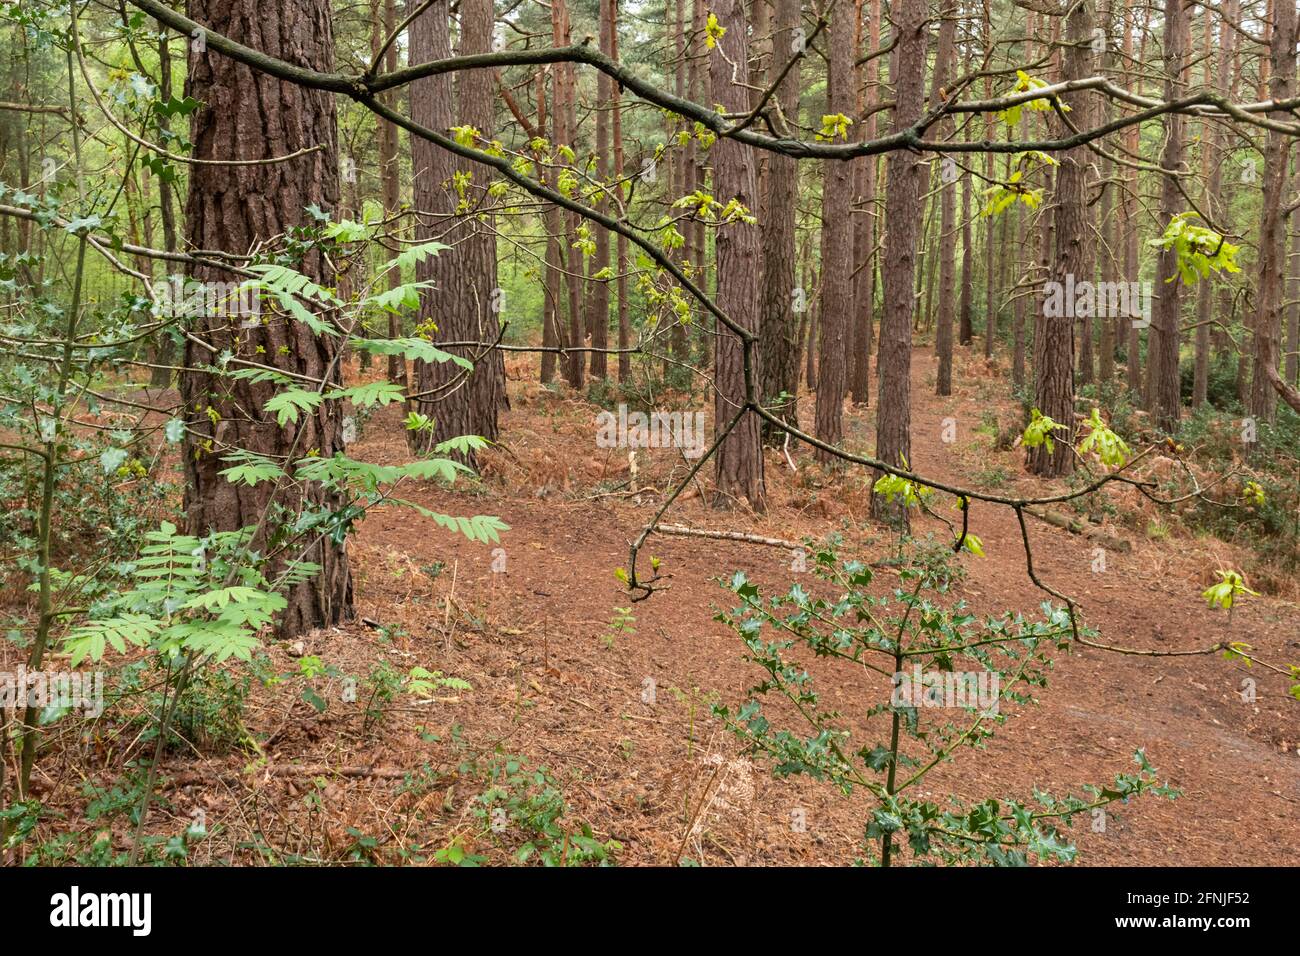 Understorey vegetation in a scots pine (Pinus sylvestris) forest plantation in Surrey, UK, including rowan, holly and oak Stock Photo